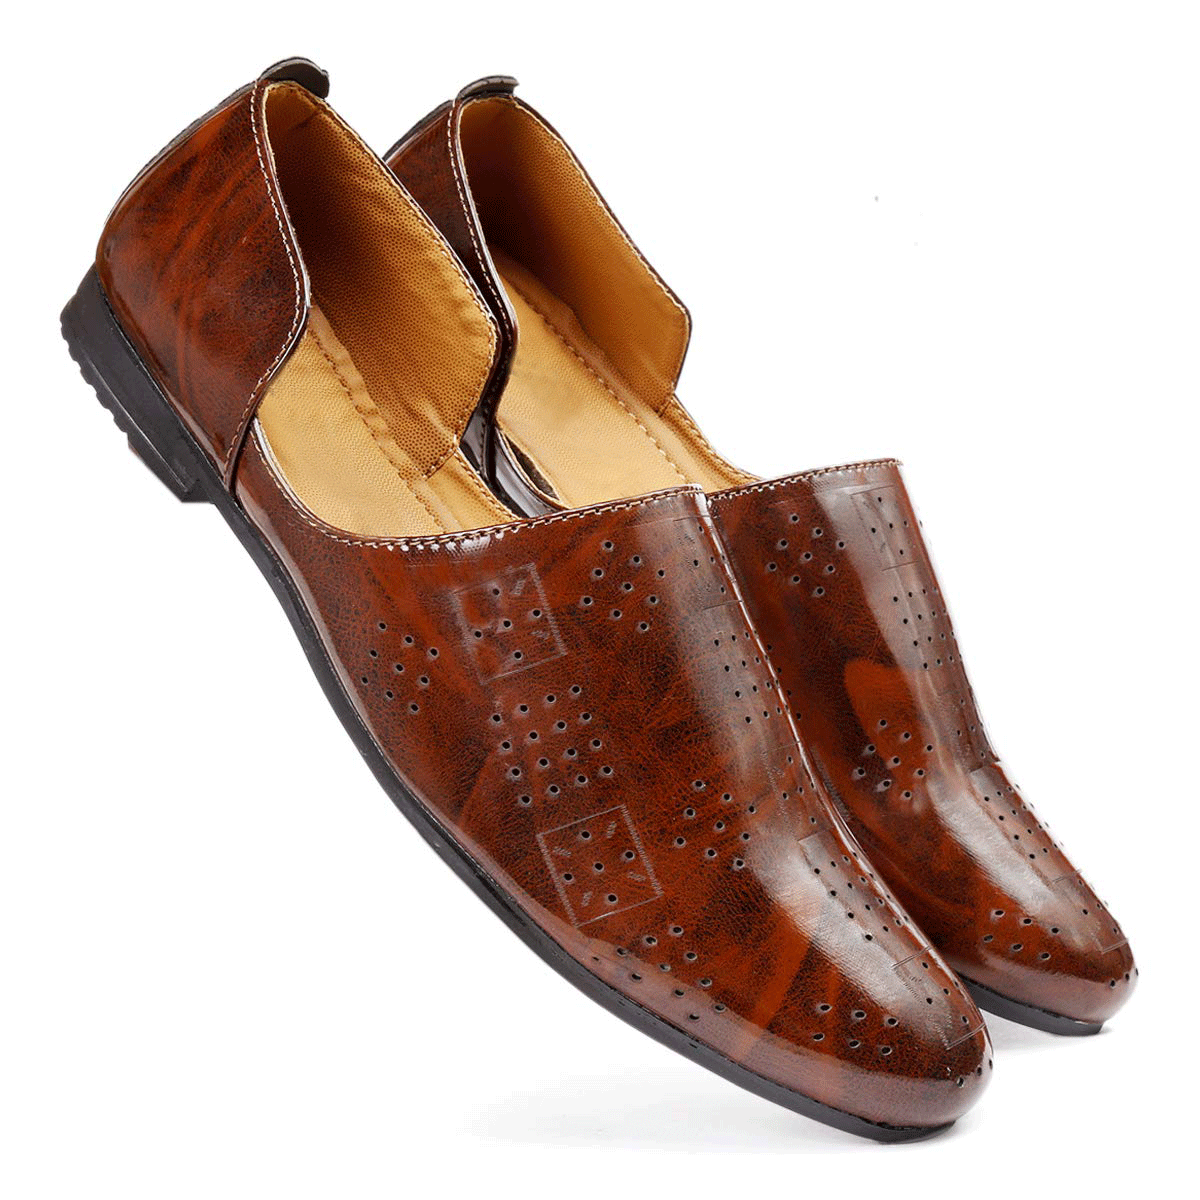 Unique Design Formal Pu Leather Loafer & Moccasins Shoes For Men's-Unique and Classy